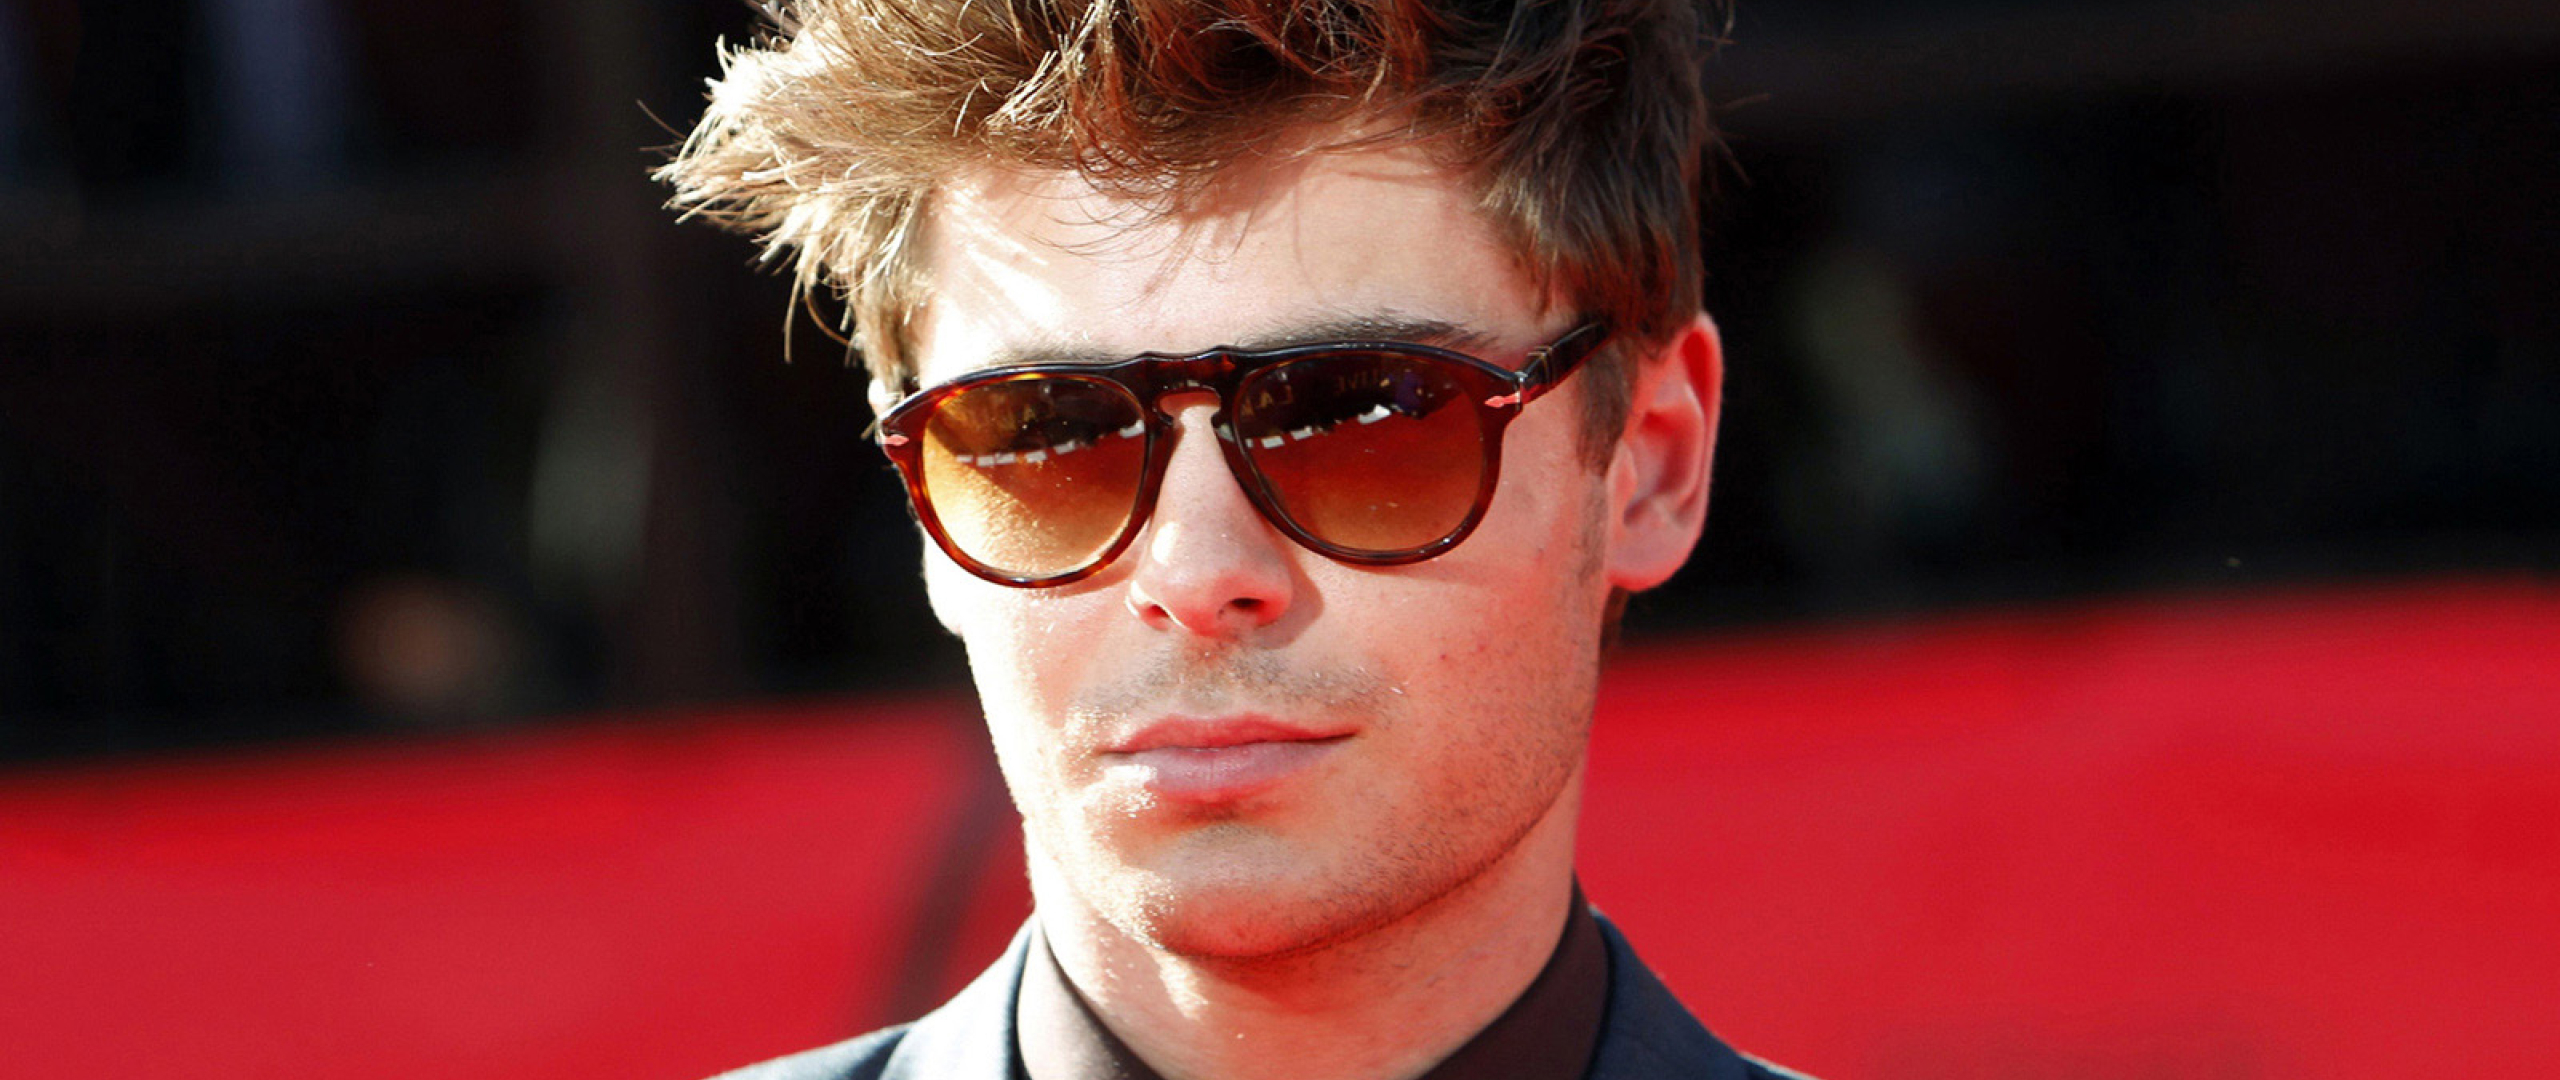 2560x1080 Zac Efron Cool Hair Style wallpaper 2560x1080 Resolution Wallpaper,  HD Celebrities 4K Wallpapers, Images, Photos and Background - Wallpapers Den